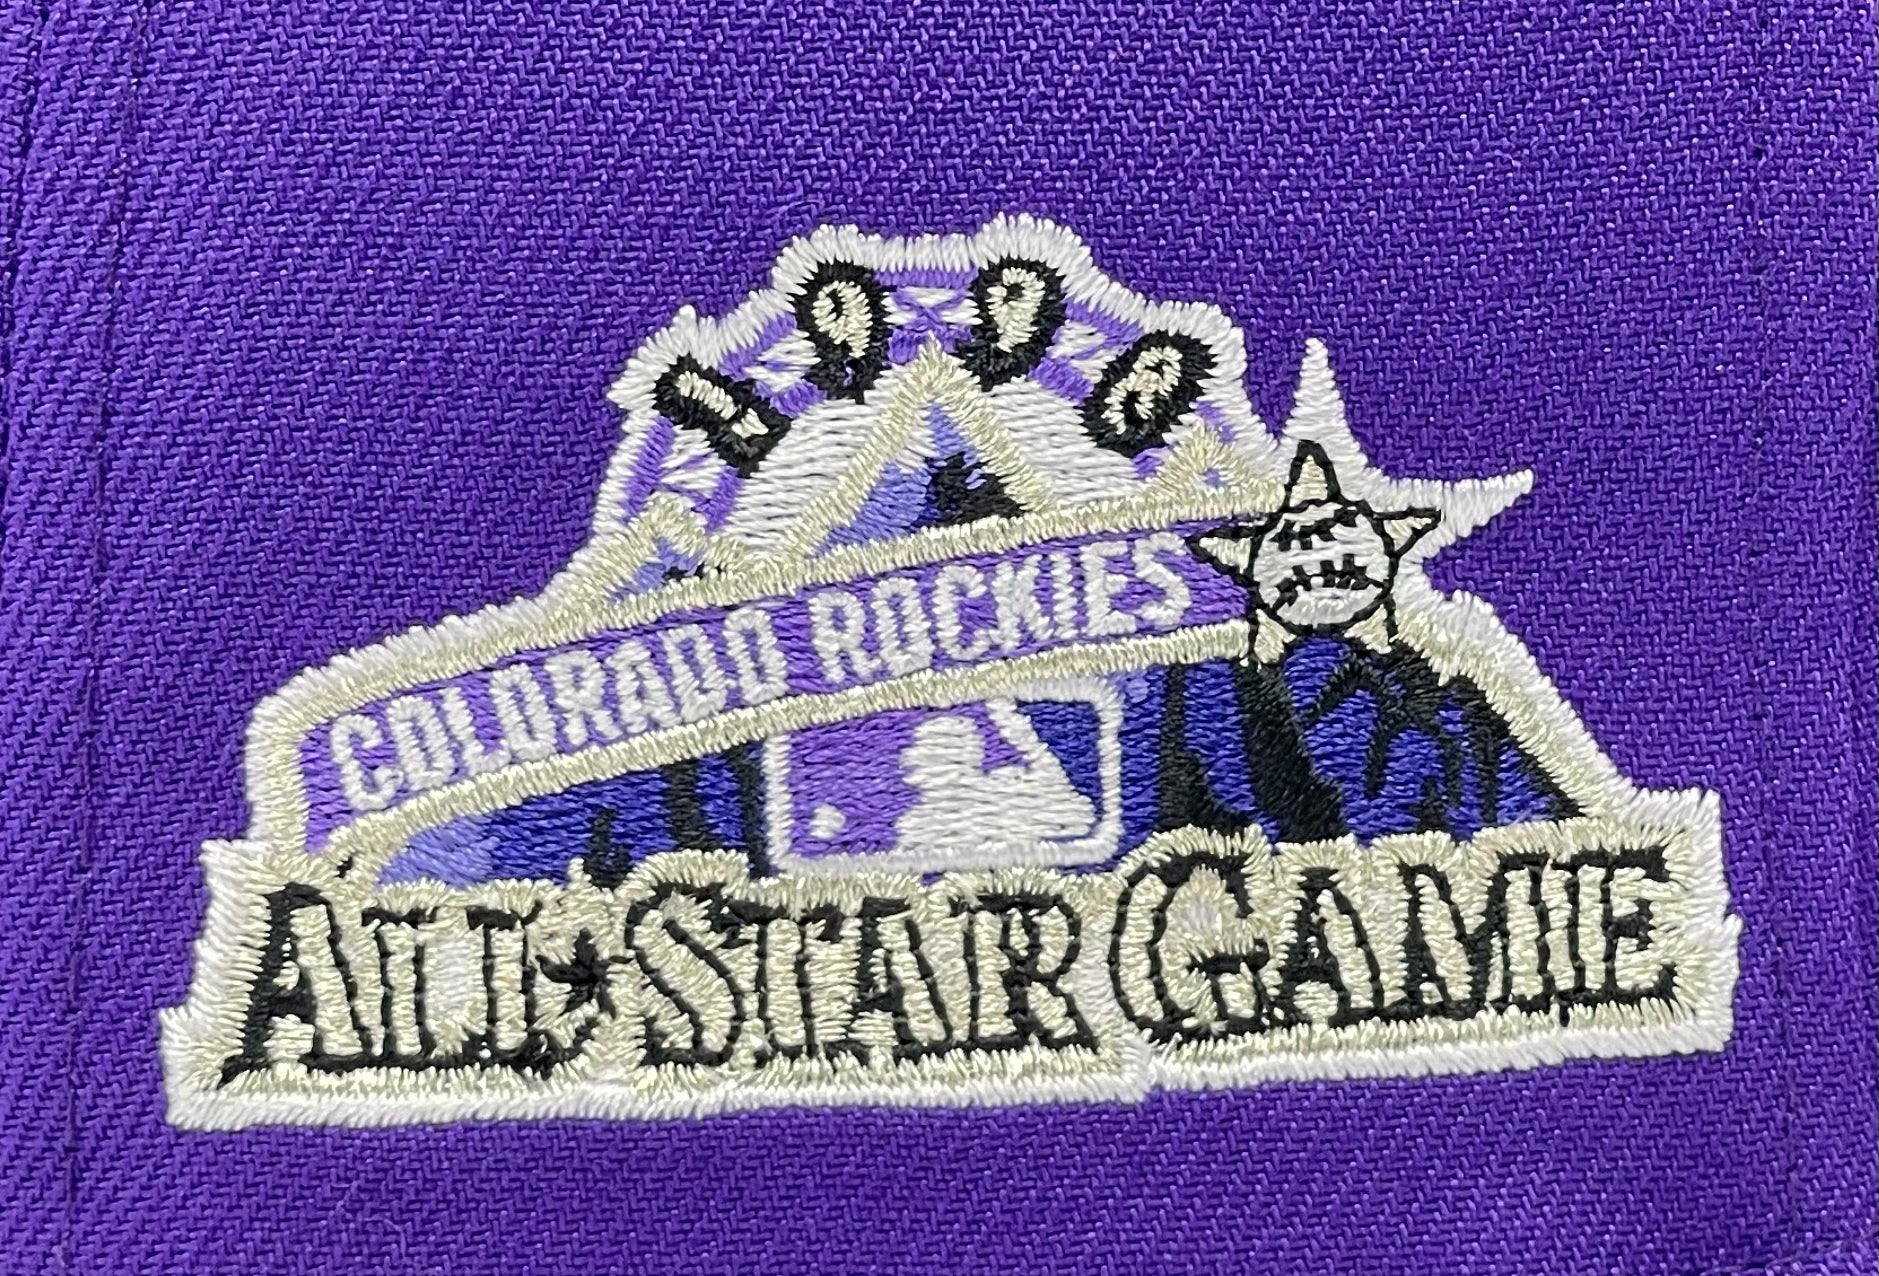 COLORADO ROCKIES (PURPLE) (1998 ALLSTARGAME) NEW ERA 59FIFTY FITTED